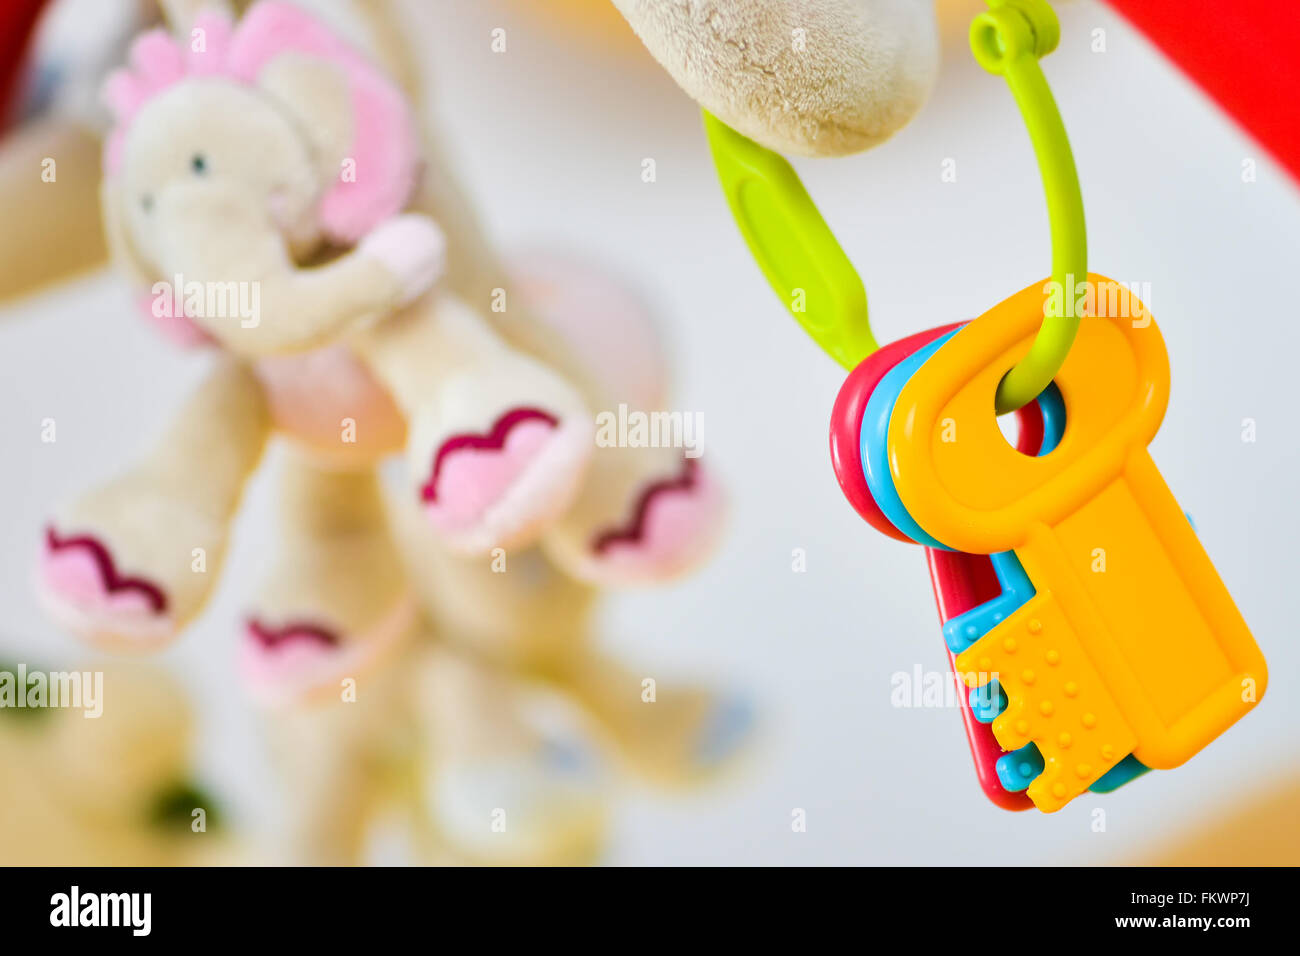 Different colorful toy keys with elephant in background Stock Photo